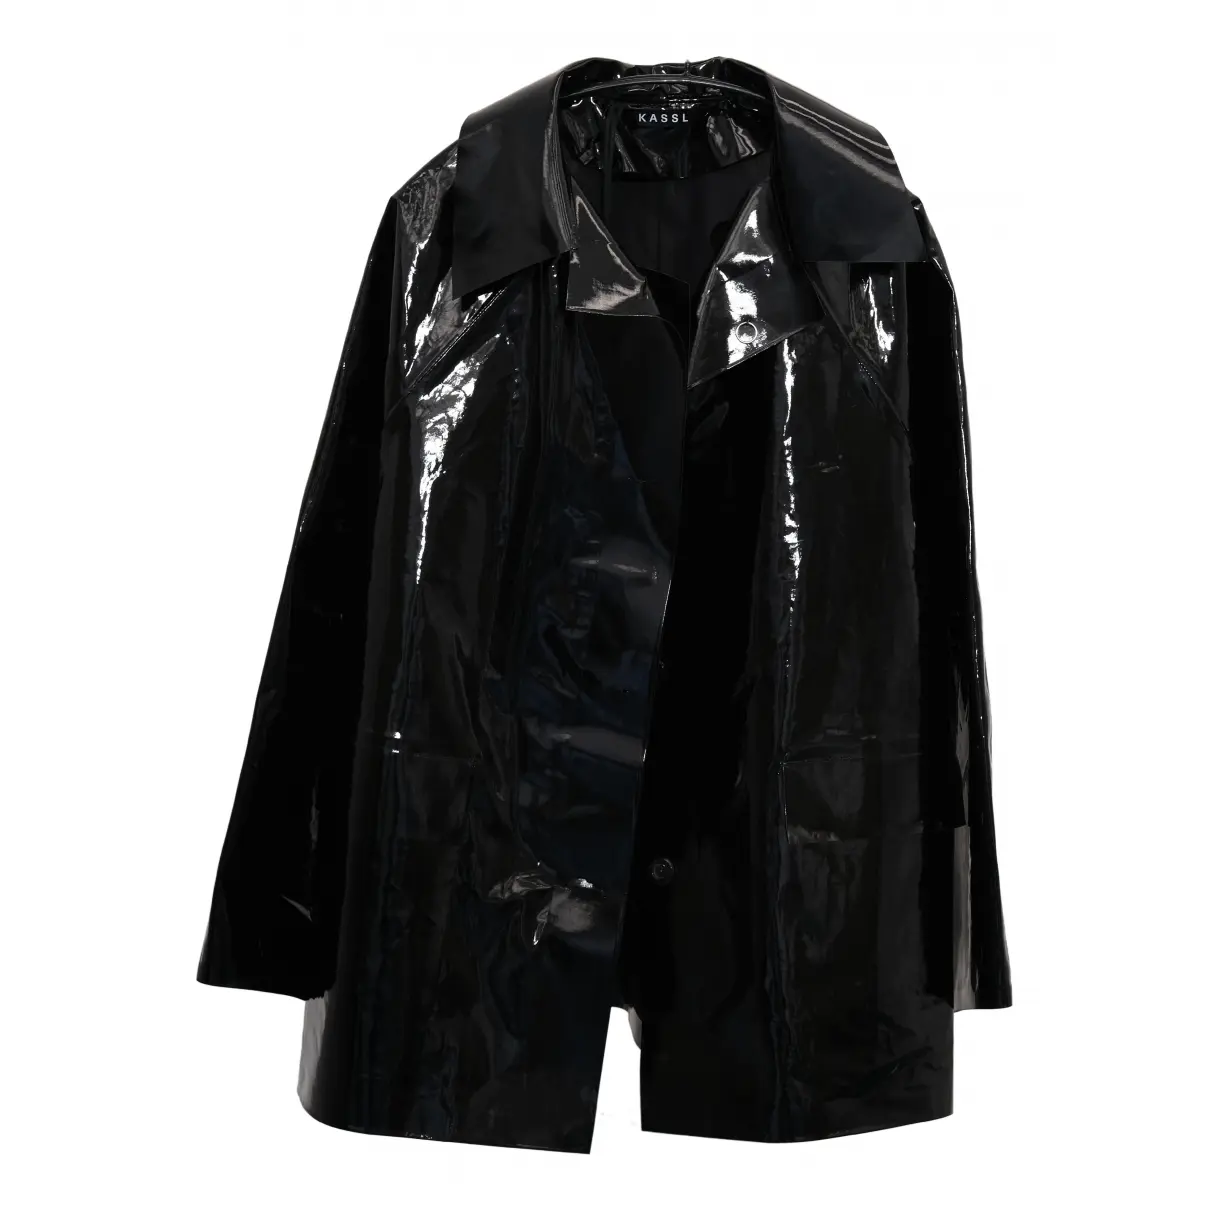 Patent leather trench coat Kassl Editions